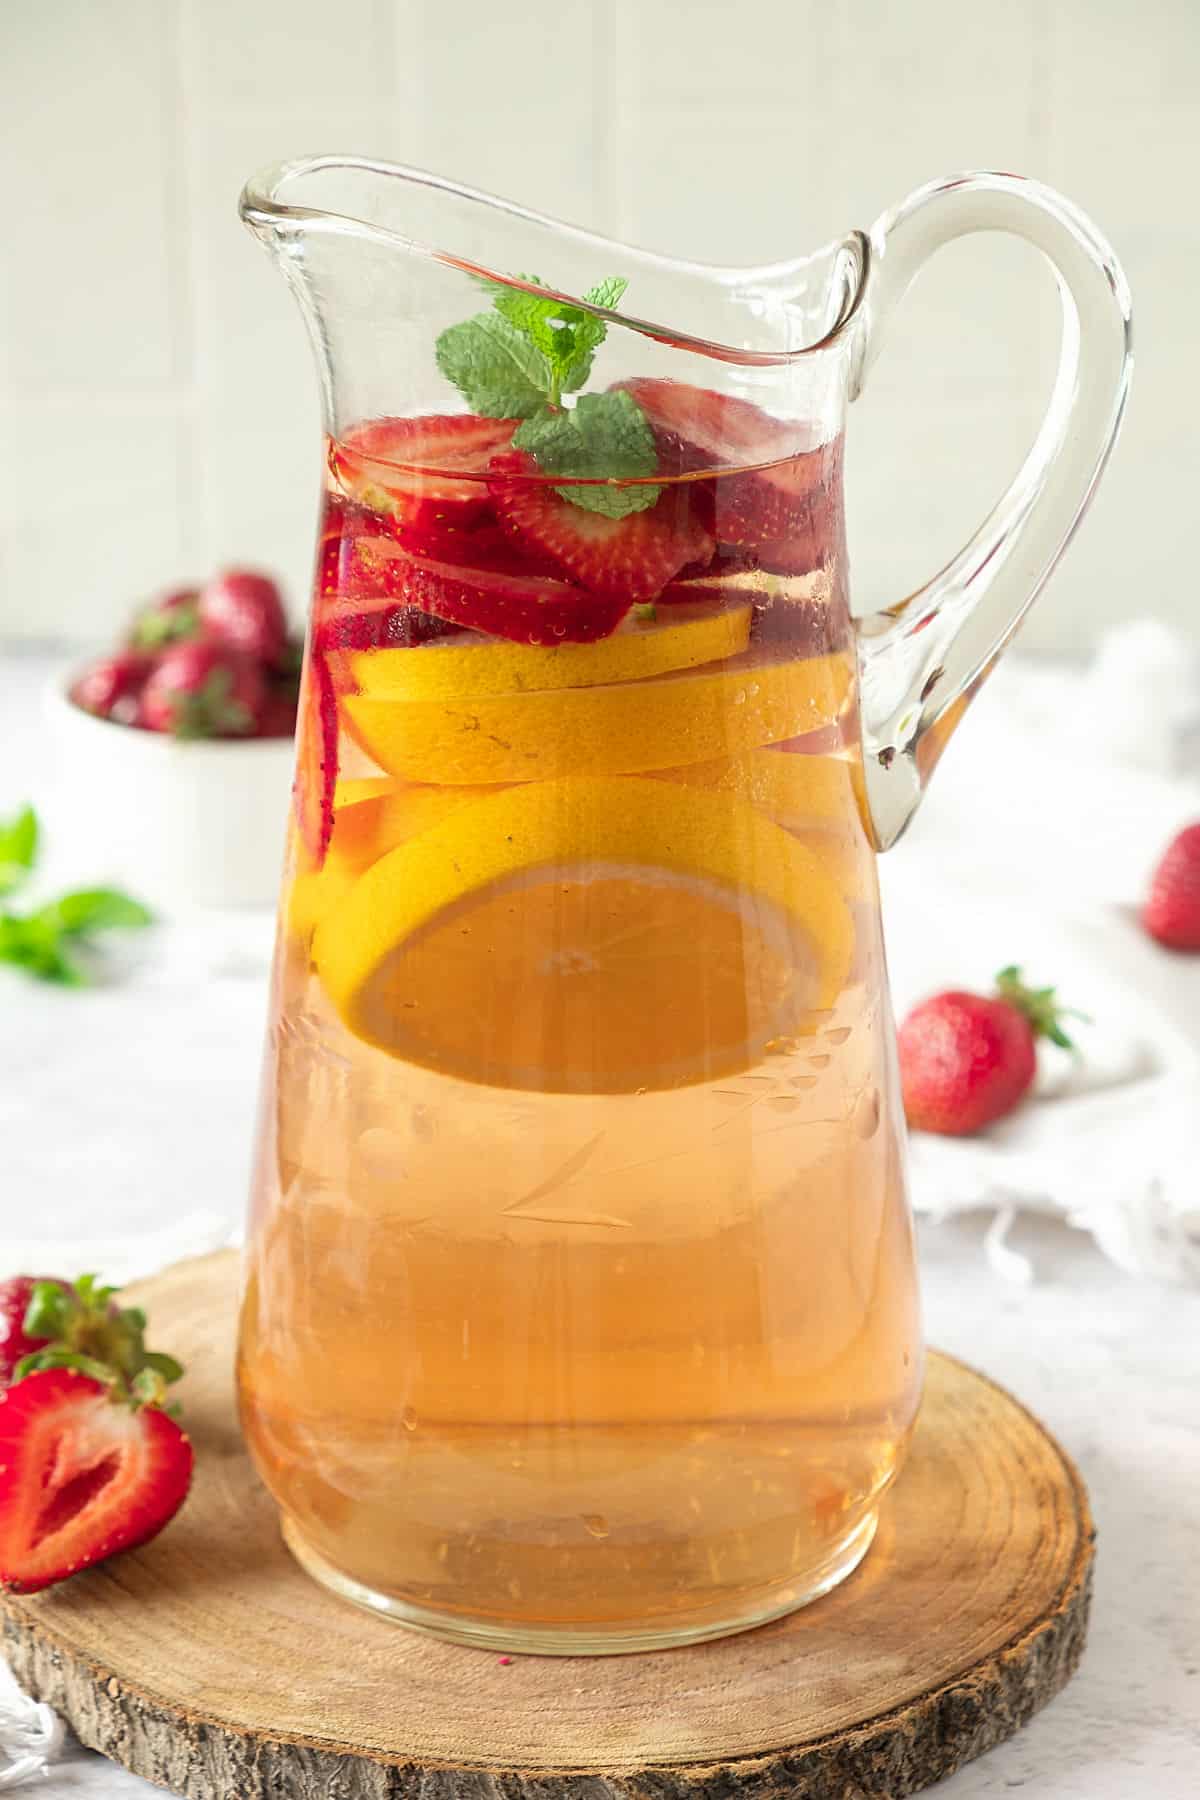 Pitcher of rosé wine sangria with strawberries, citrus slices on a wooden round. Light grey background, fresh strawberries.